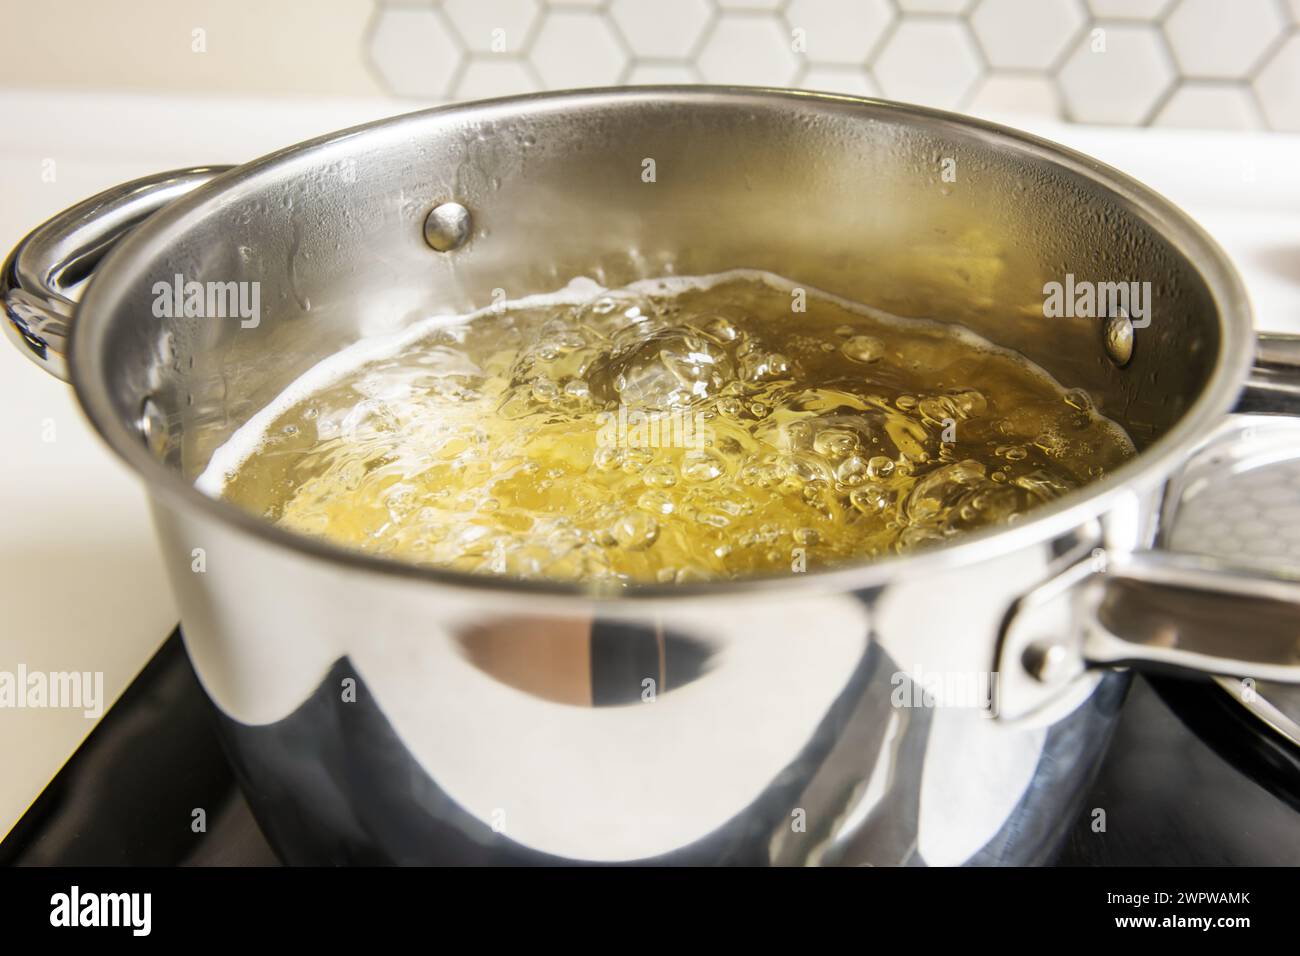 A stainless steel pot filled with boiling water bubbling at 100 degrees Celsius Stock Photo